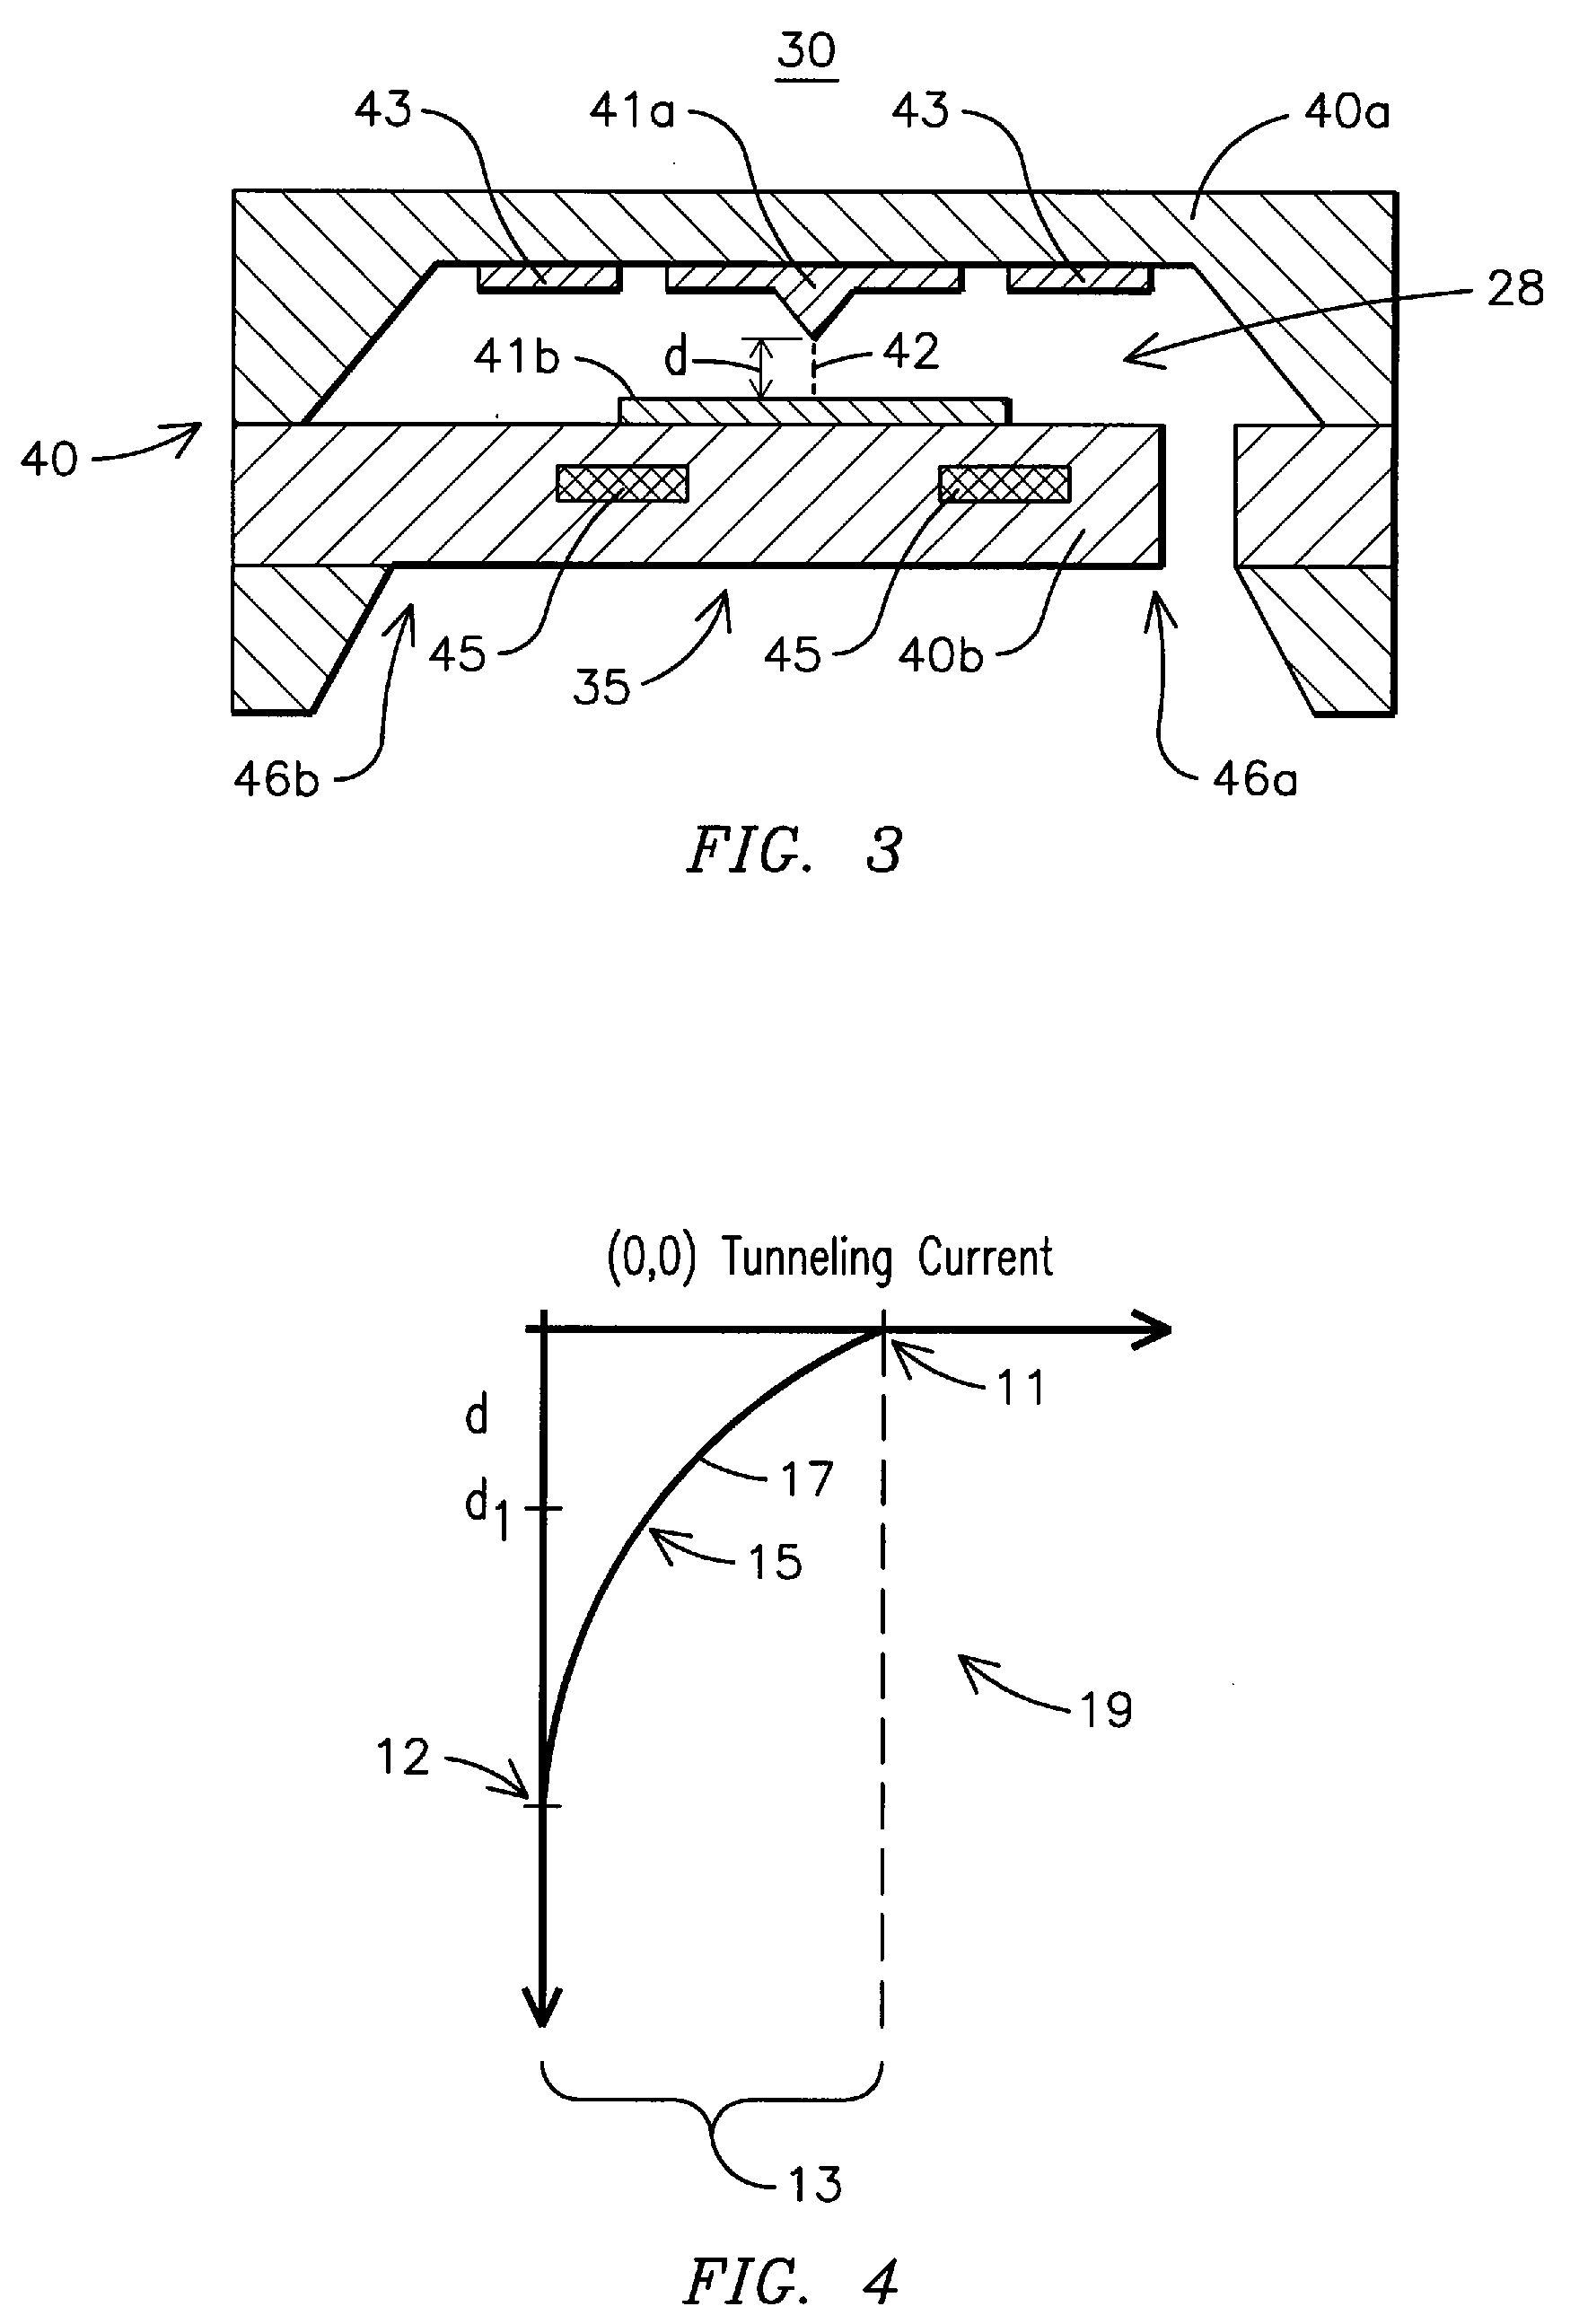 Micro-electromechanical system (MEMS) based current and magnetic field sensor using tunneling current sensing